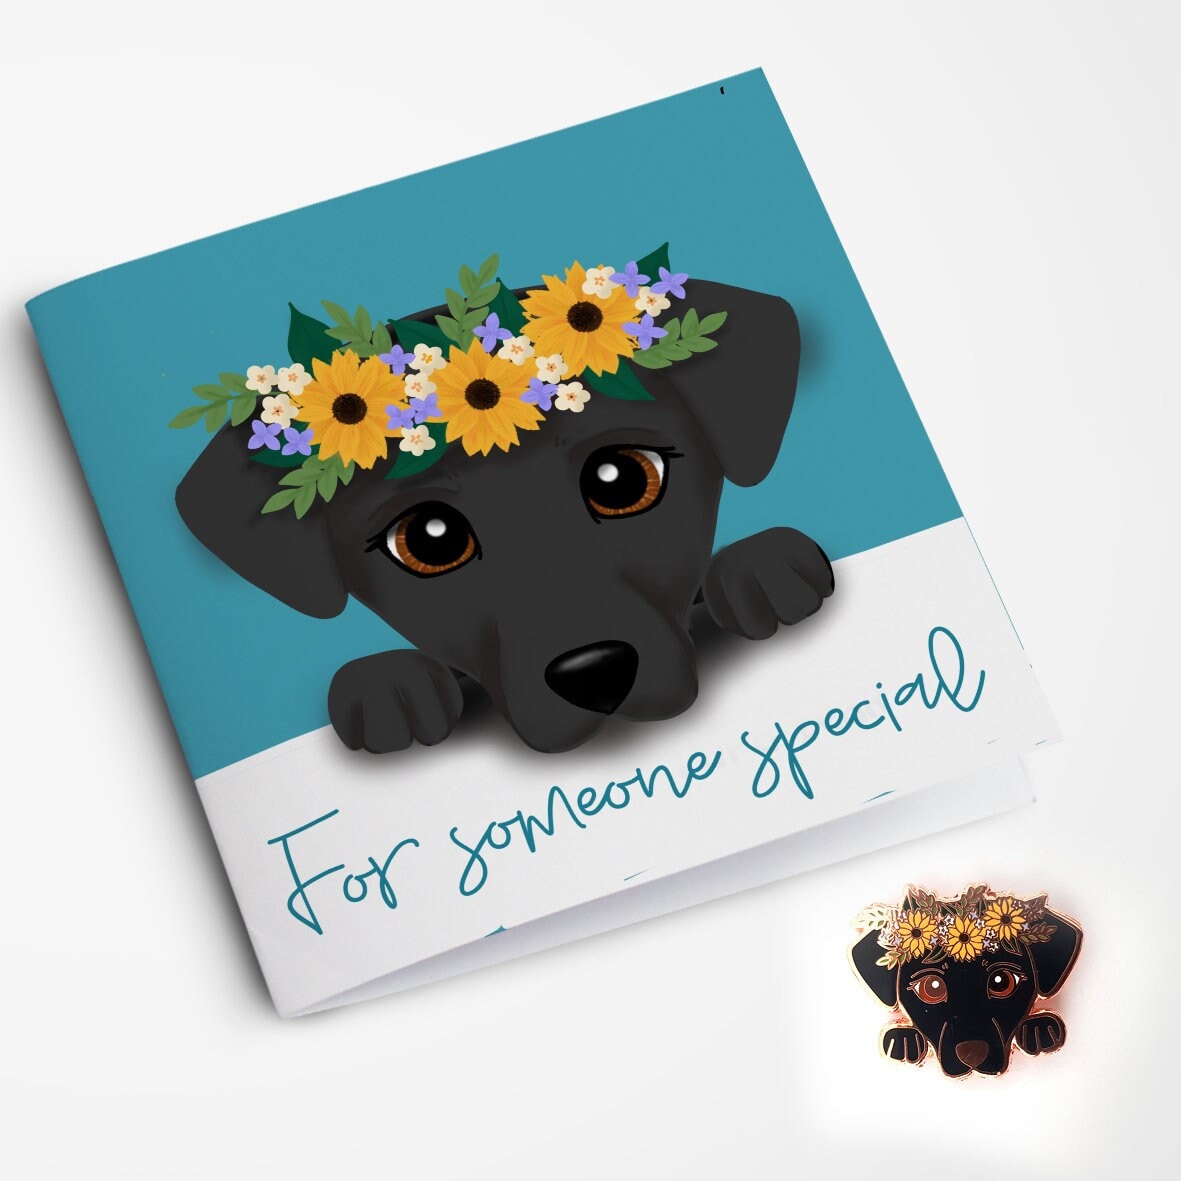 Layla Lu - Any Occasion Greeting Card, Greeting Cards/Postcards, Greeting & Note Cards